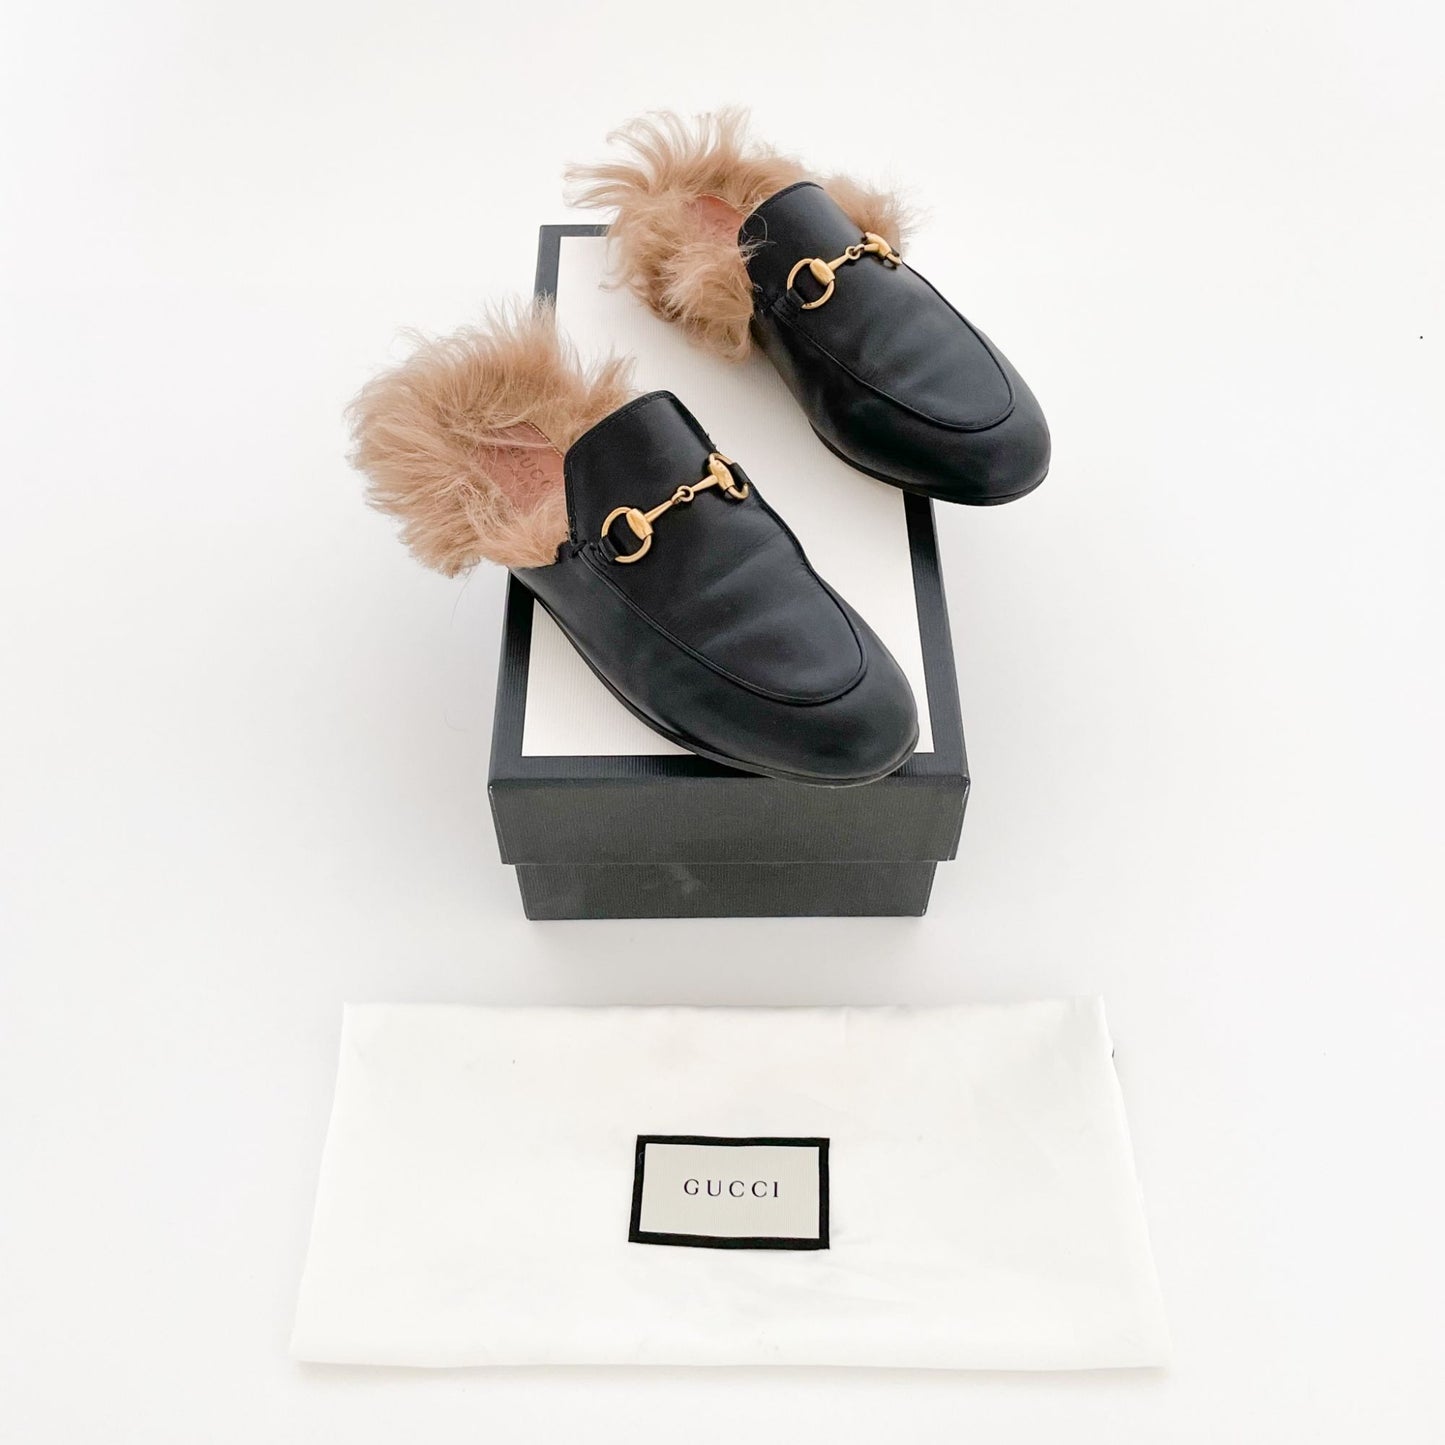 Gucci Princetown Shearling-Lined Leather Slipper in Black Size 36